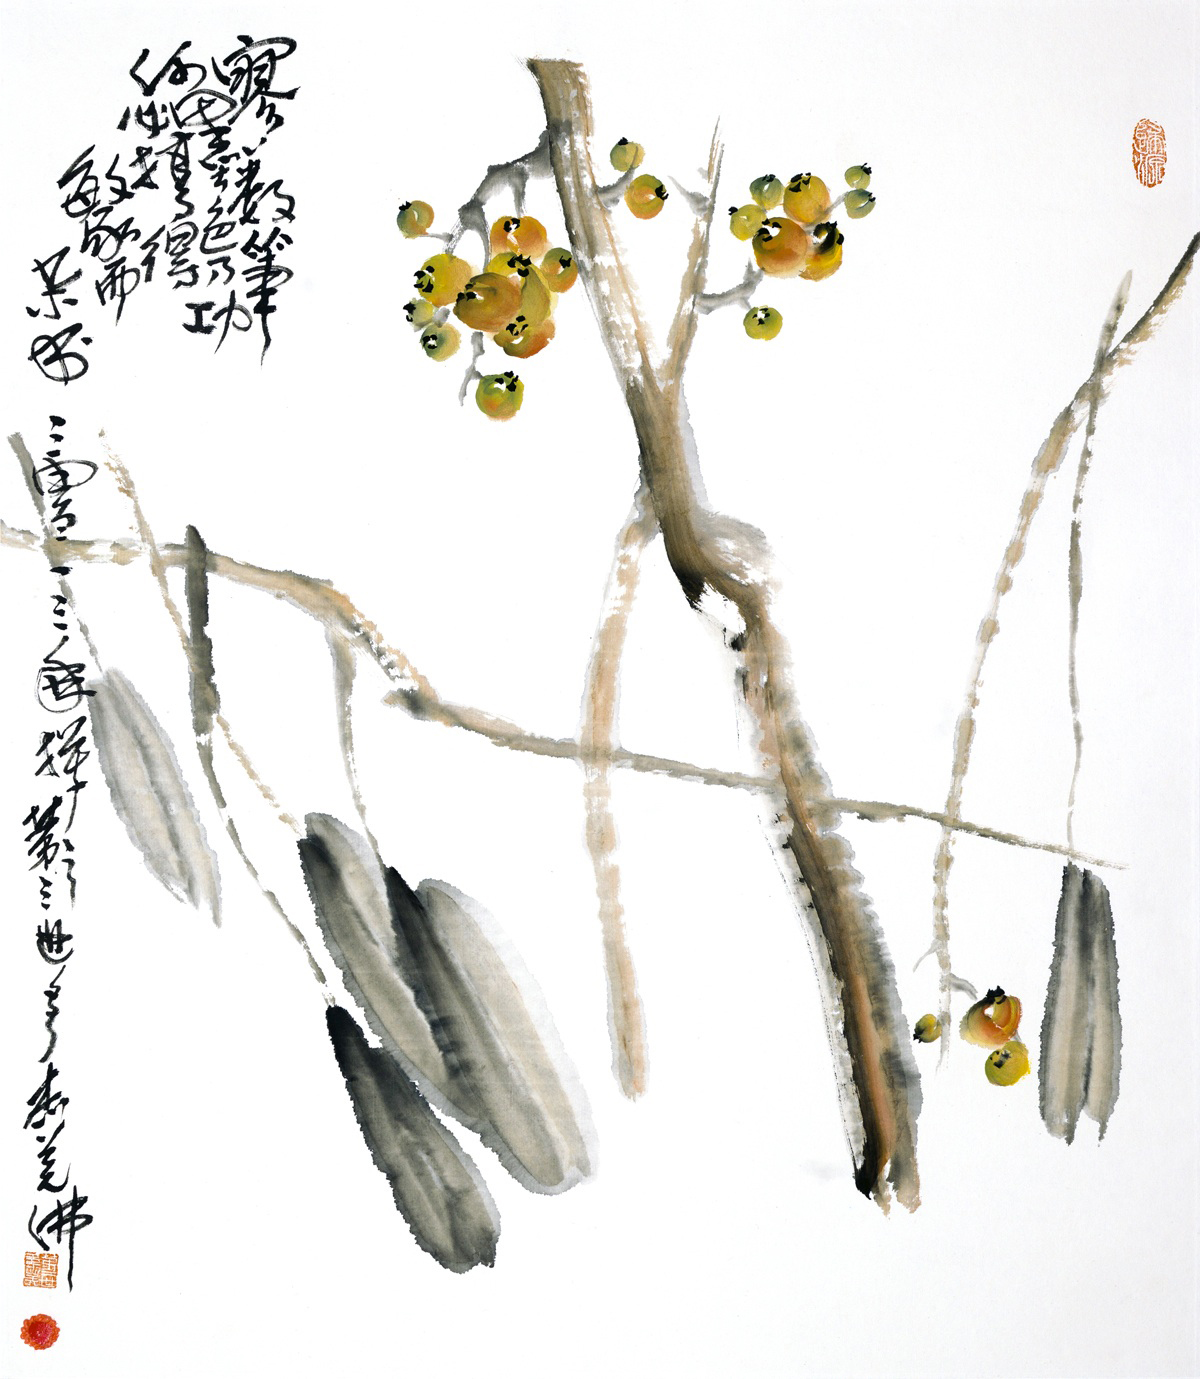 ‘Loquat,’ 2013, by HH Dorji Chang Buddha III. A minimalist but dynamic portrayal created by deft strokes, with no extraneous marks. Carries the bell seal of Dorji Chang Buddha III and a three-dimensional finger print Gui Yuan. Starting bid: $9 million. Gianguan Auctions image